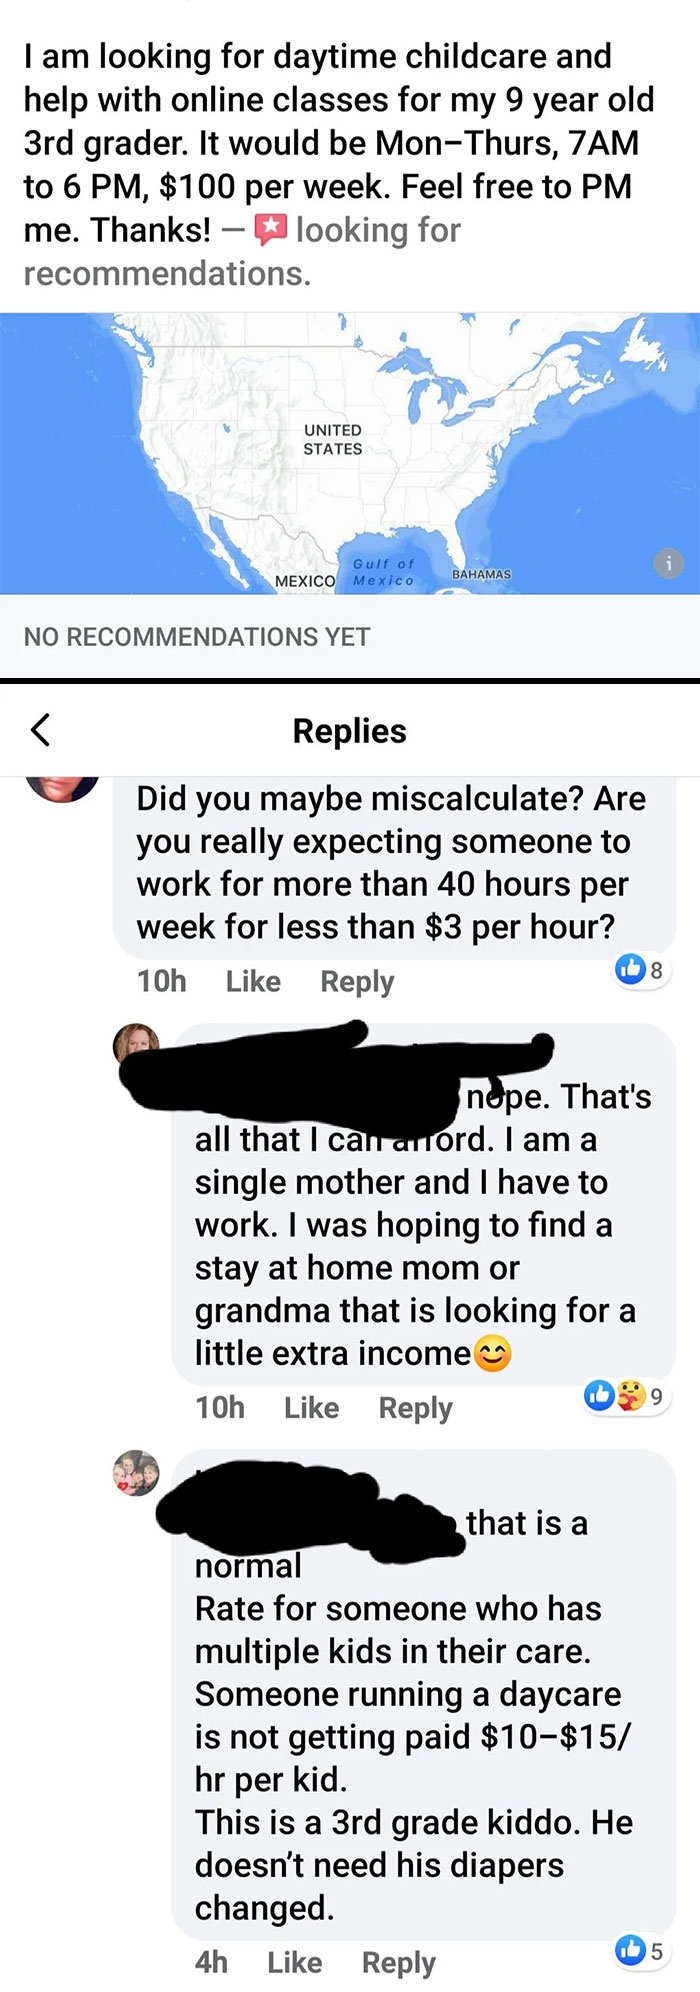 2.73 Per Hour Is A Normal Rate For Childcare, Apparently